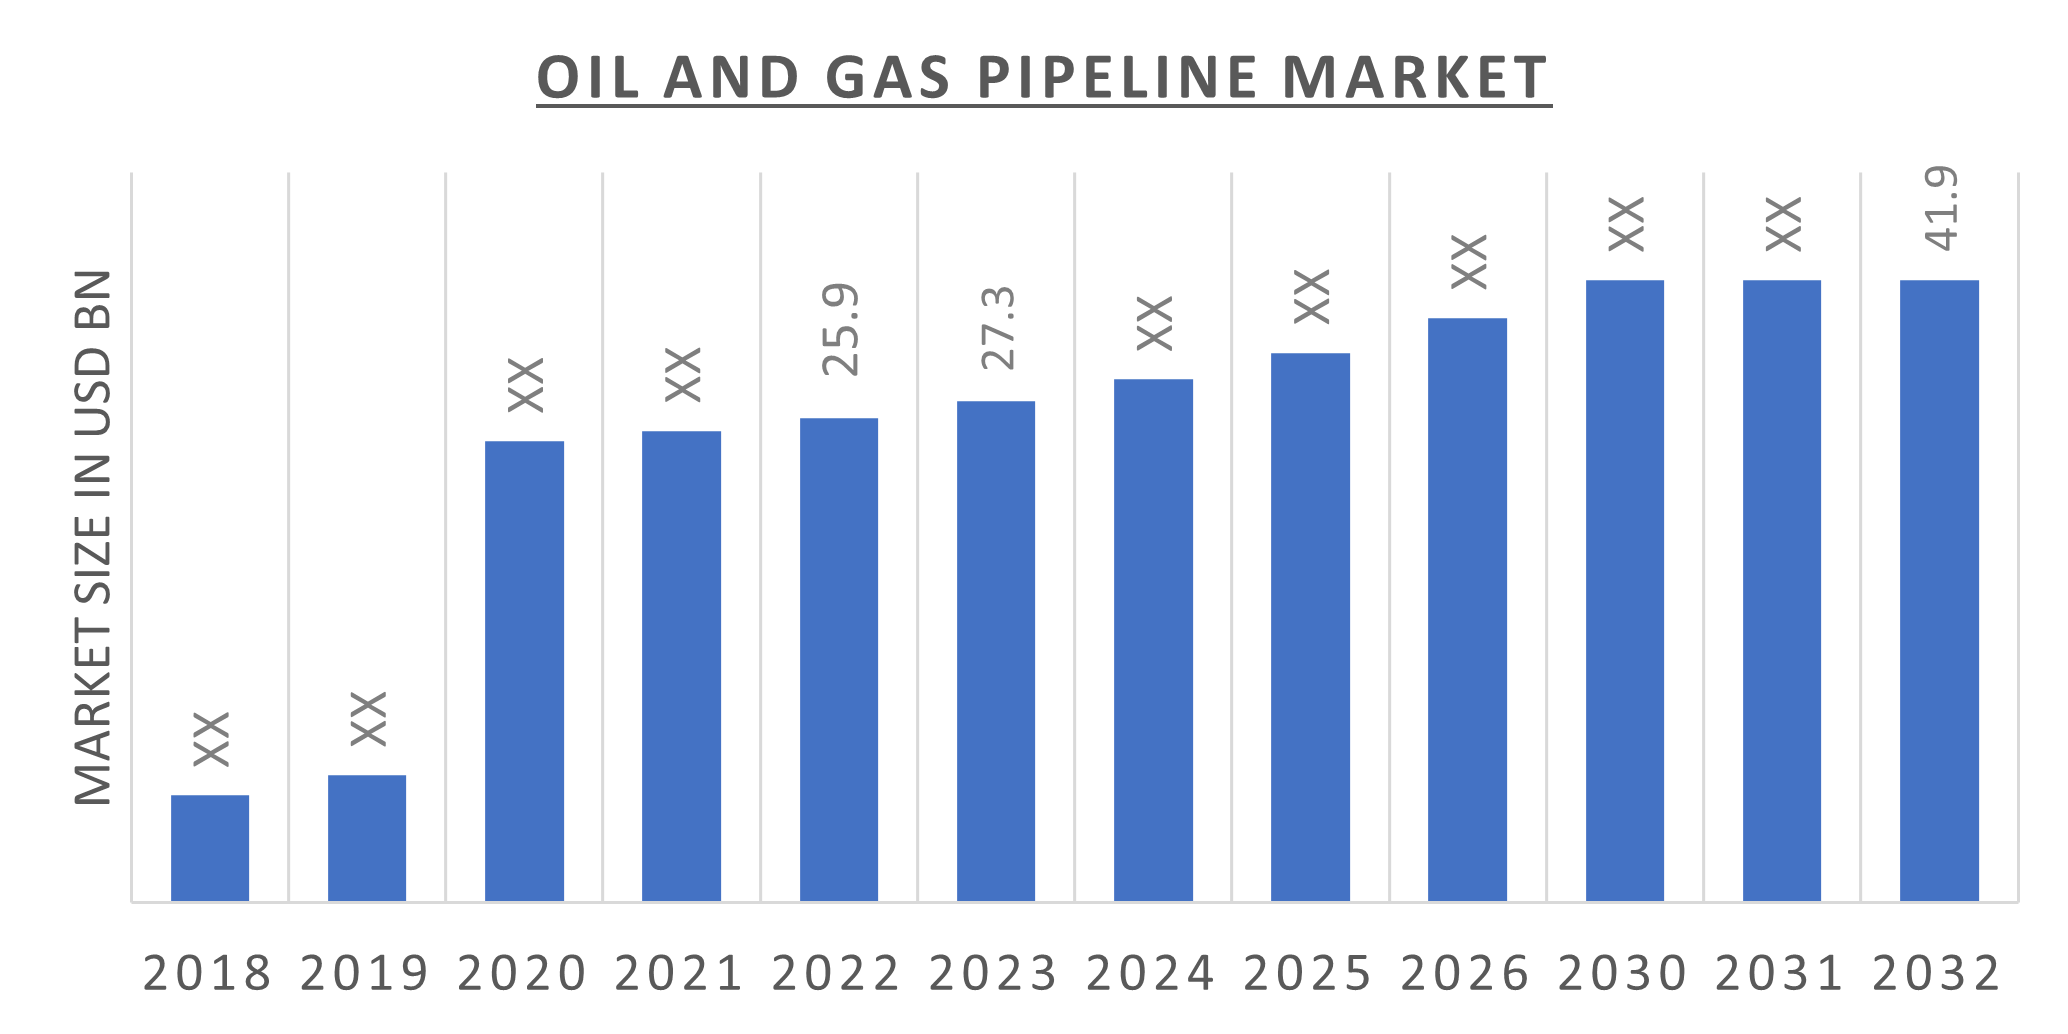 Global Oil and Gas Pipeline Market Overview